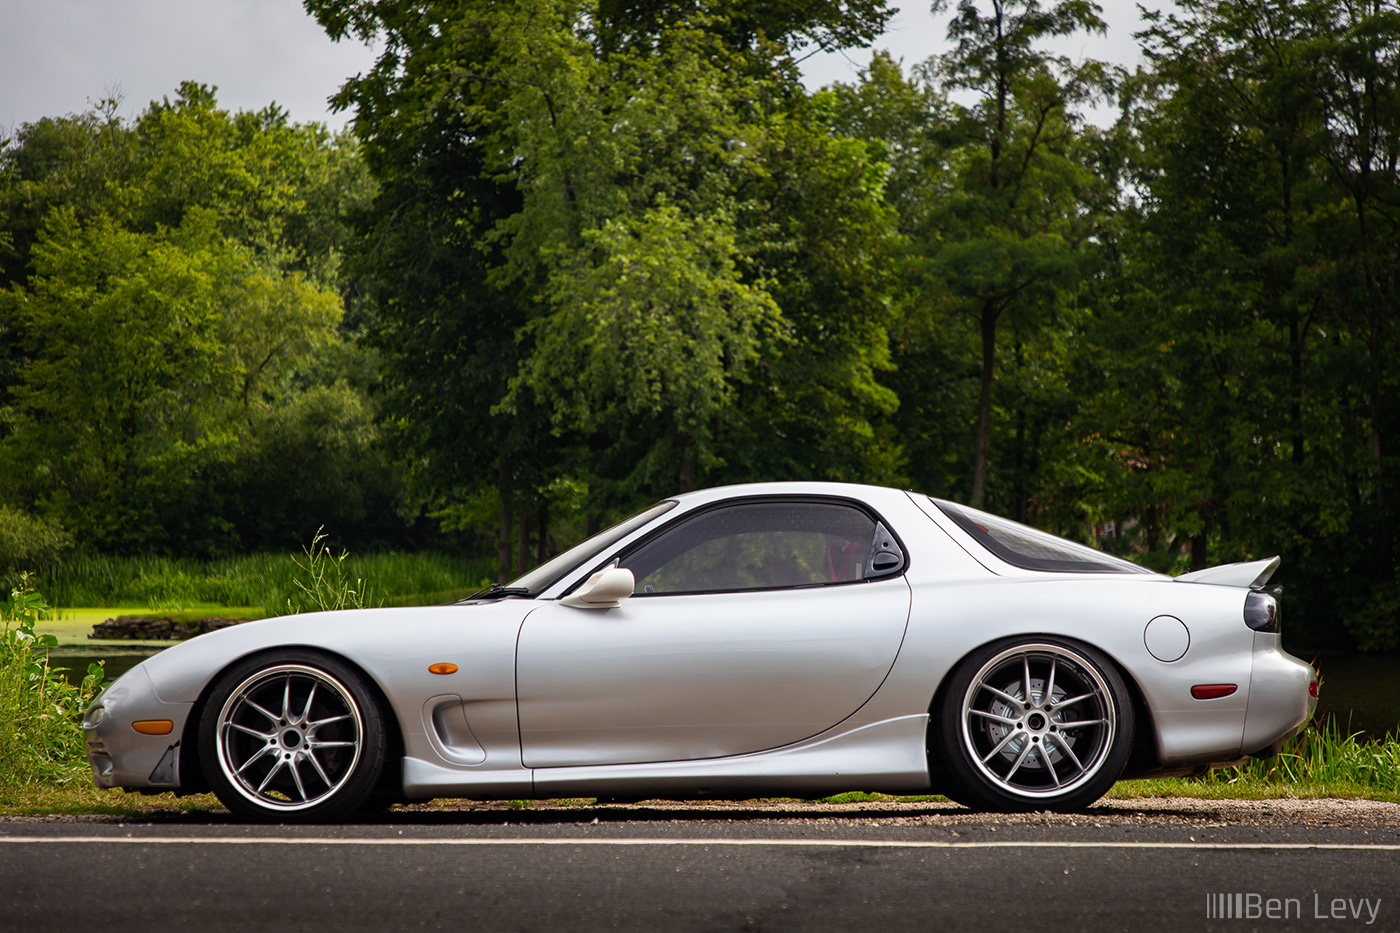 Side of Righ-Hand Drive Mazda RX-7